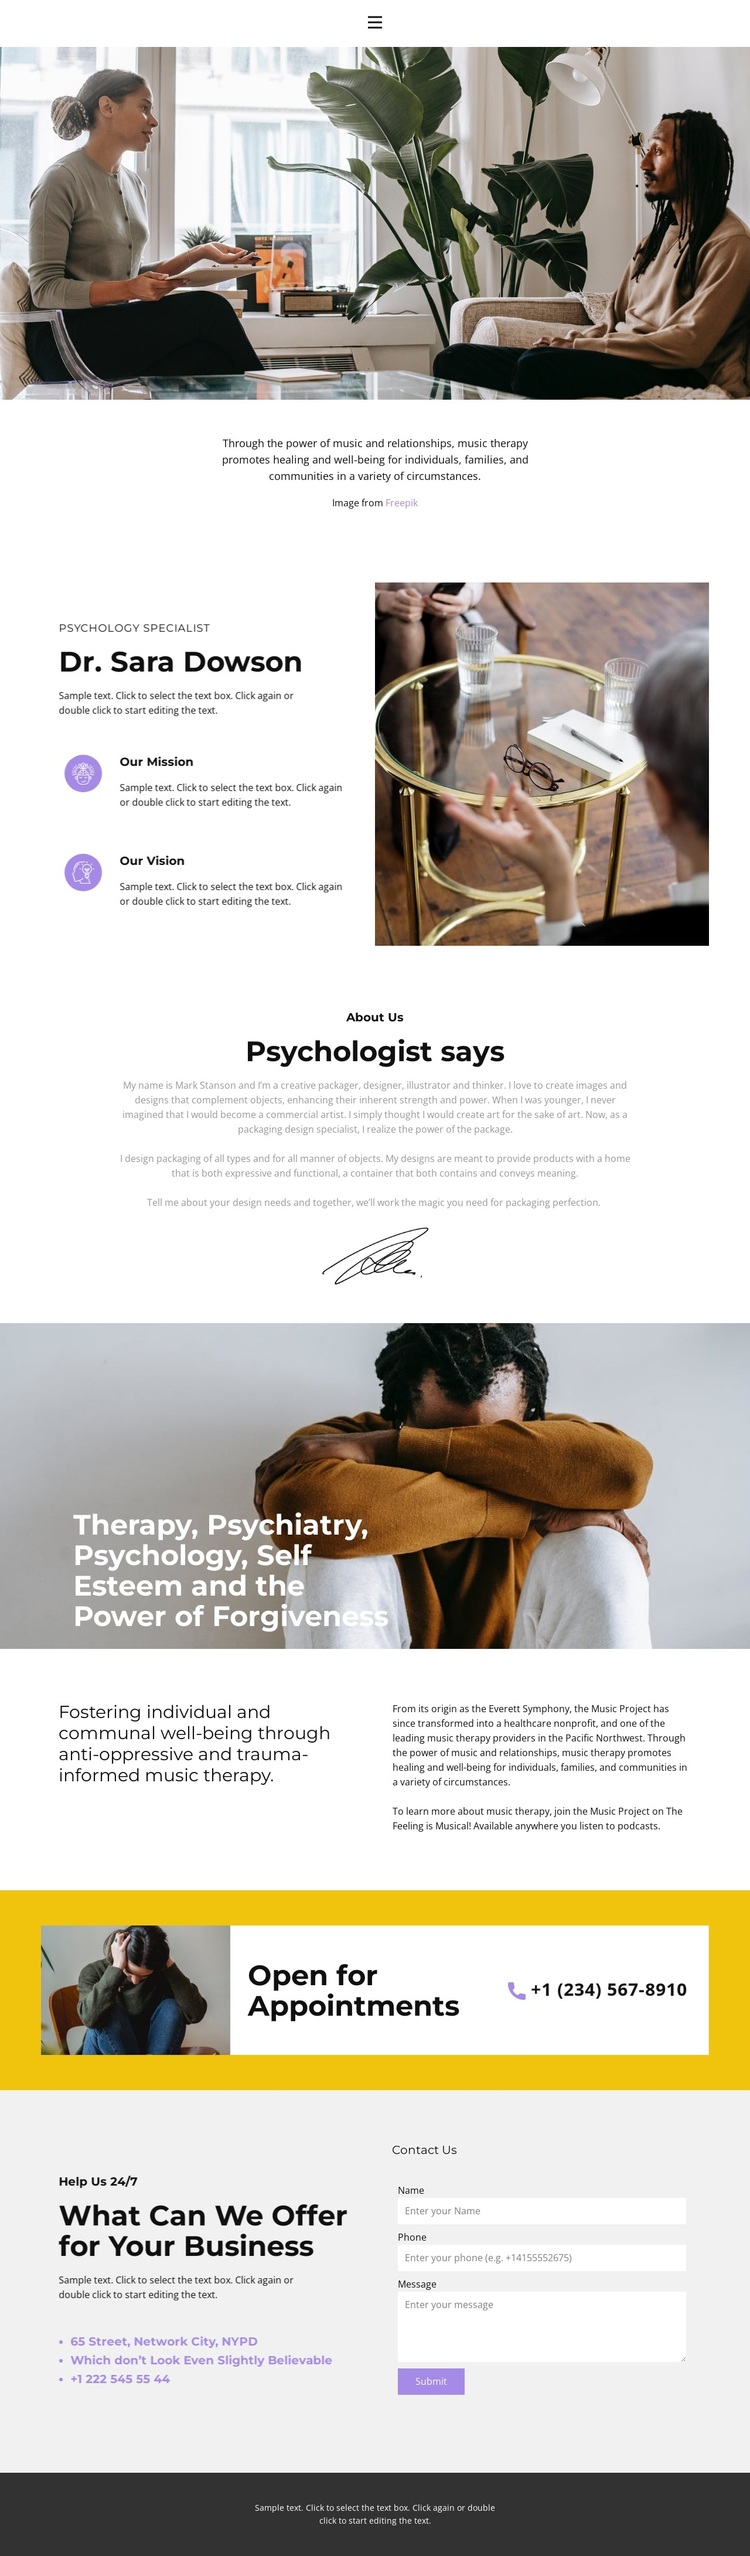 Qualified help from a psychologist Joomla Page Builder